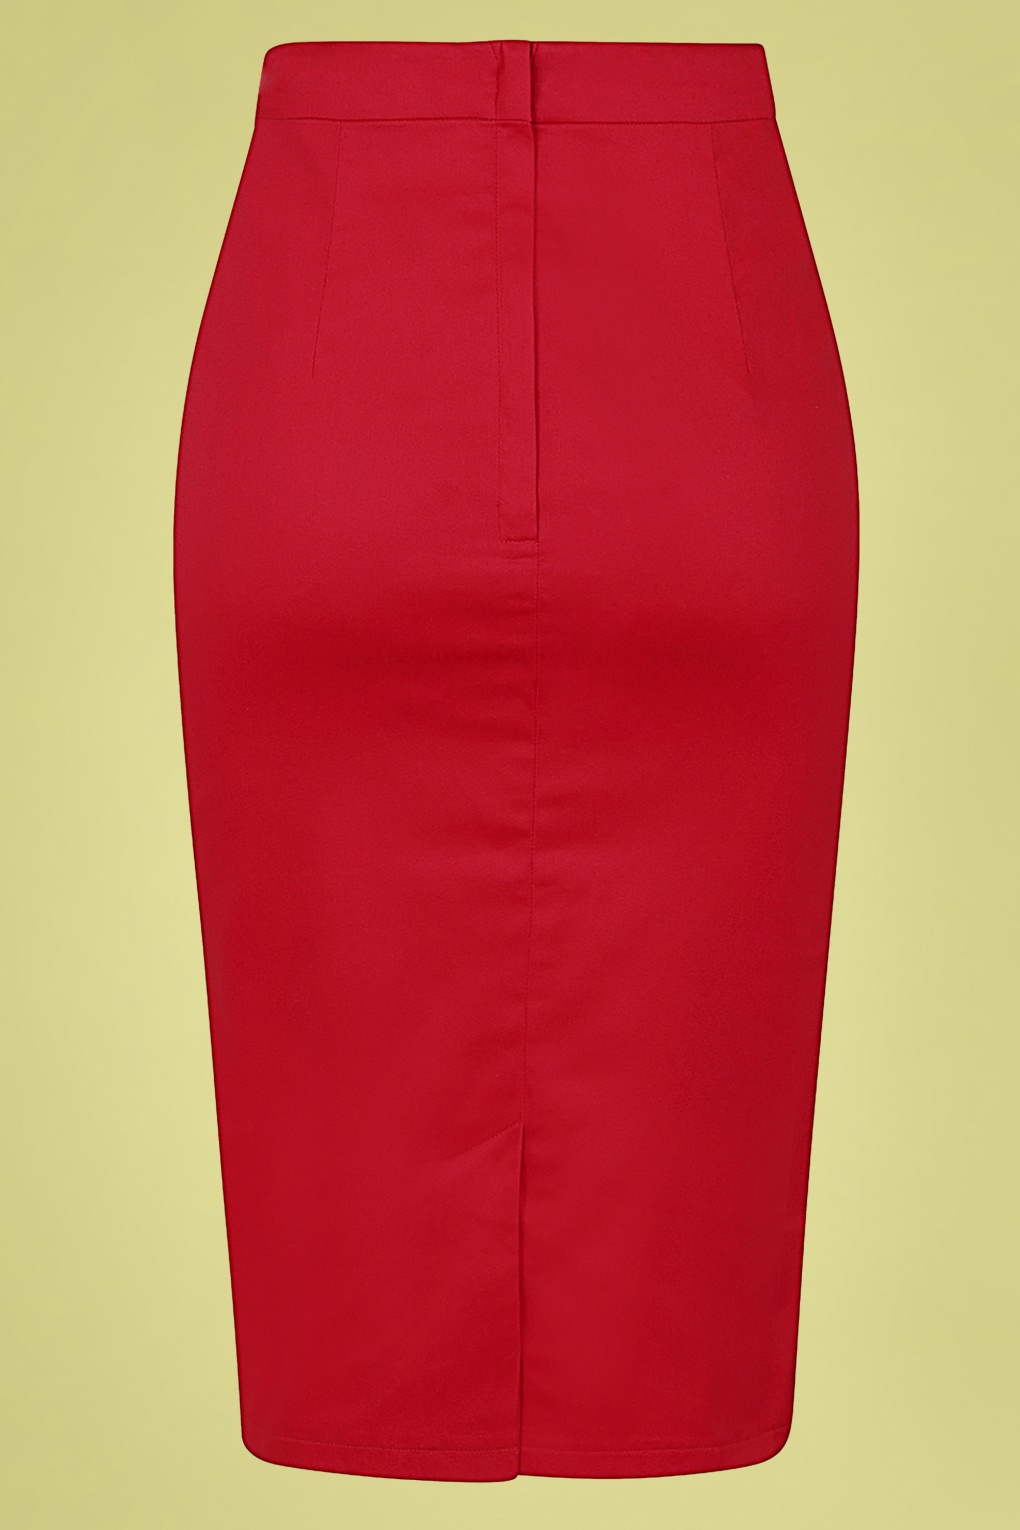 50s Bettina Pencil Skirt in Lipstick Red